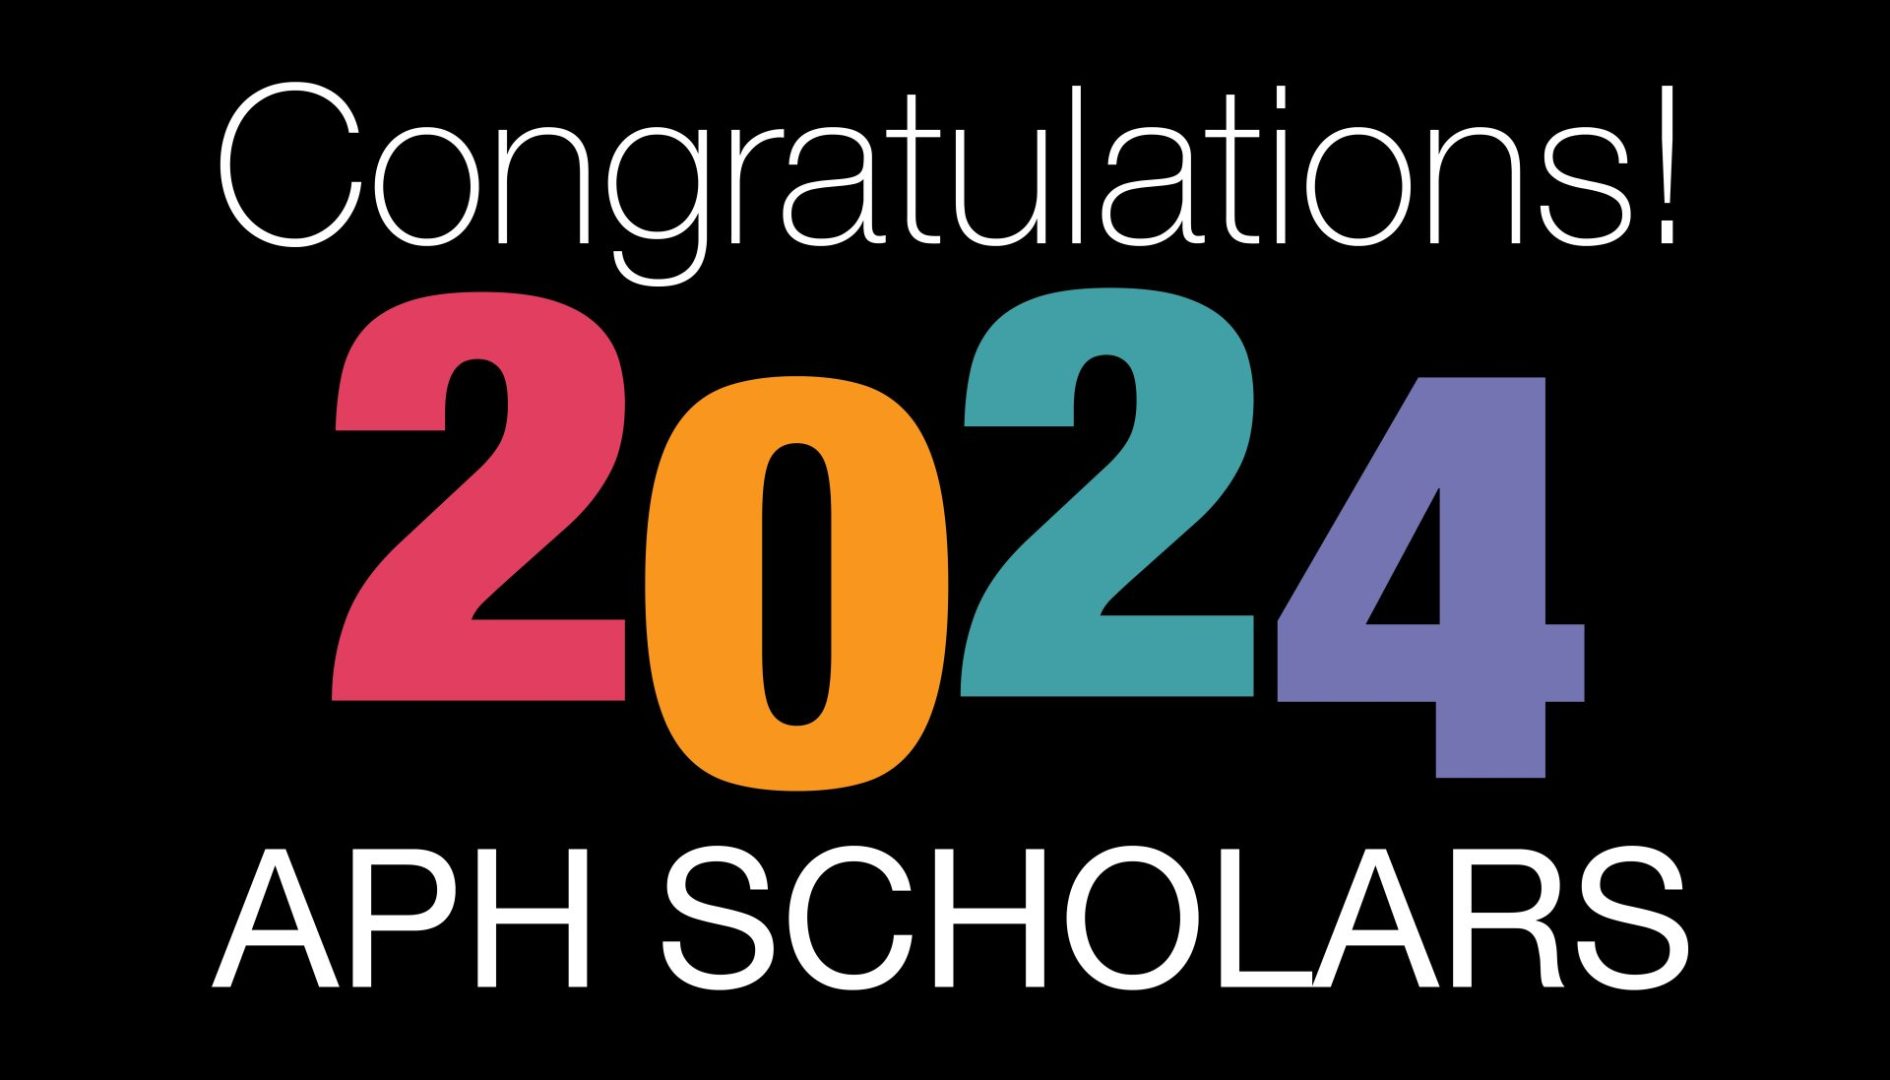 Text: "Congratulations! 2024 APH Scholars." Each number in the "2024" is a different APH branding color.